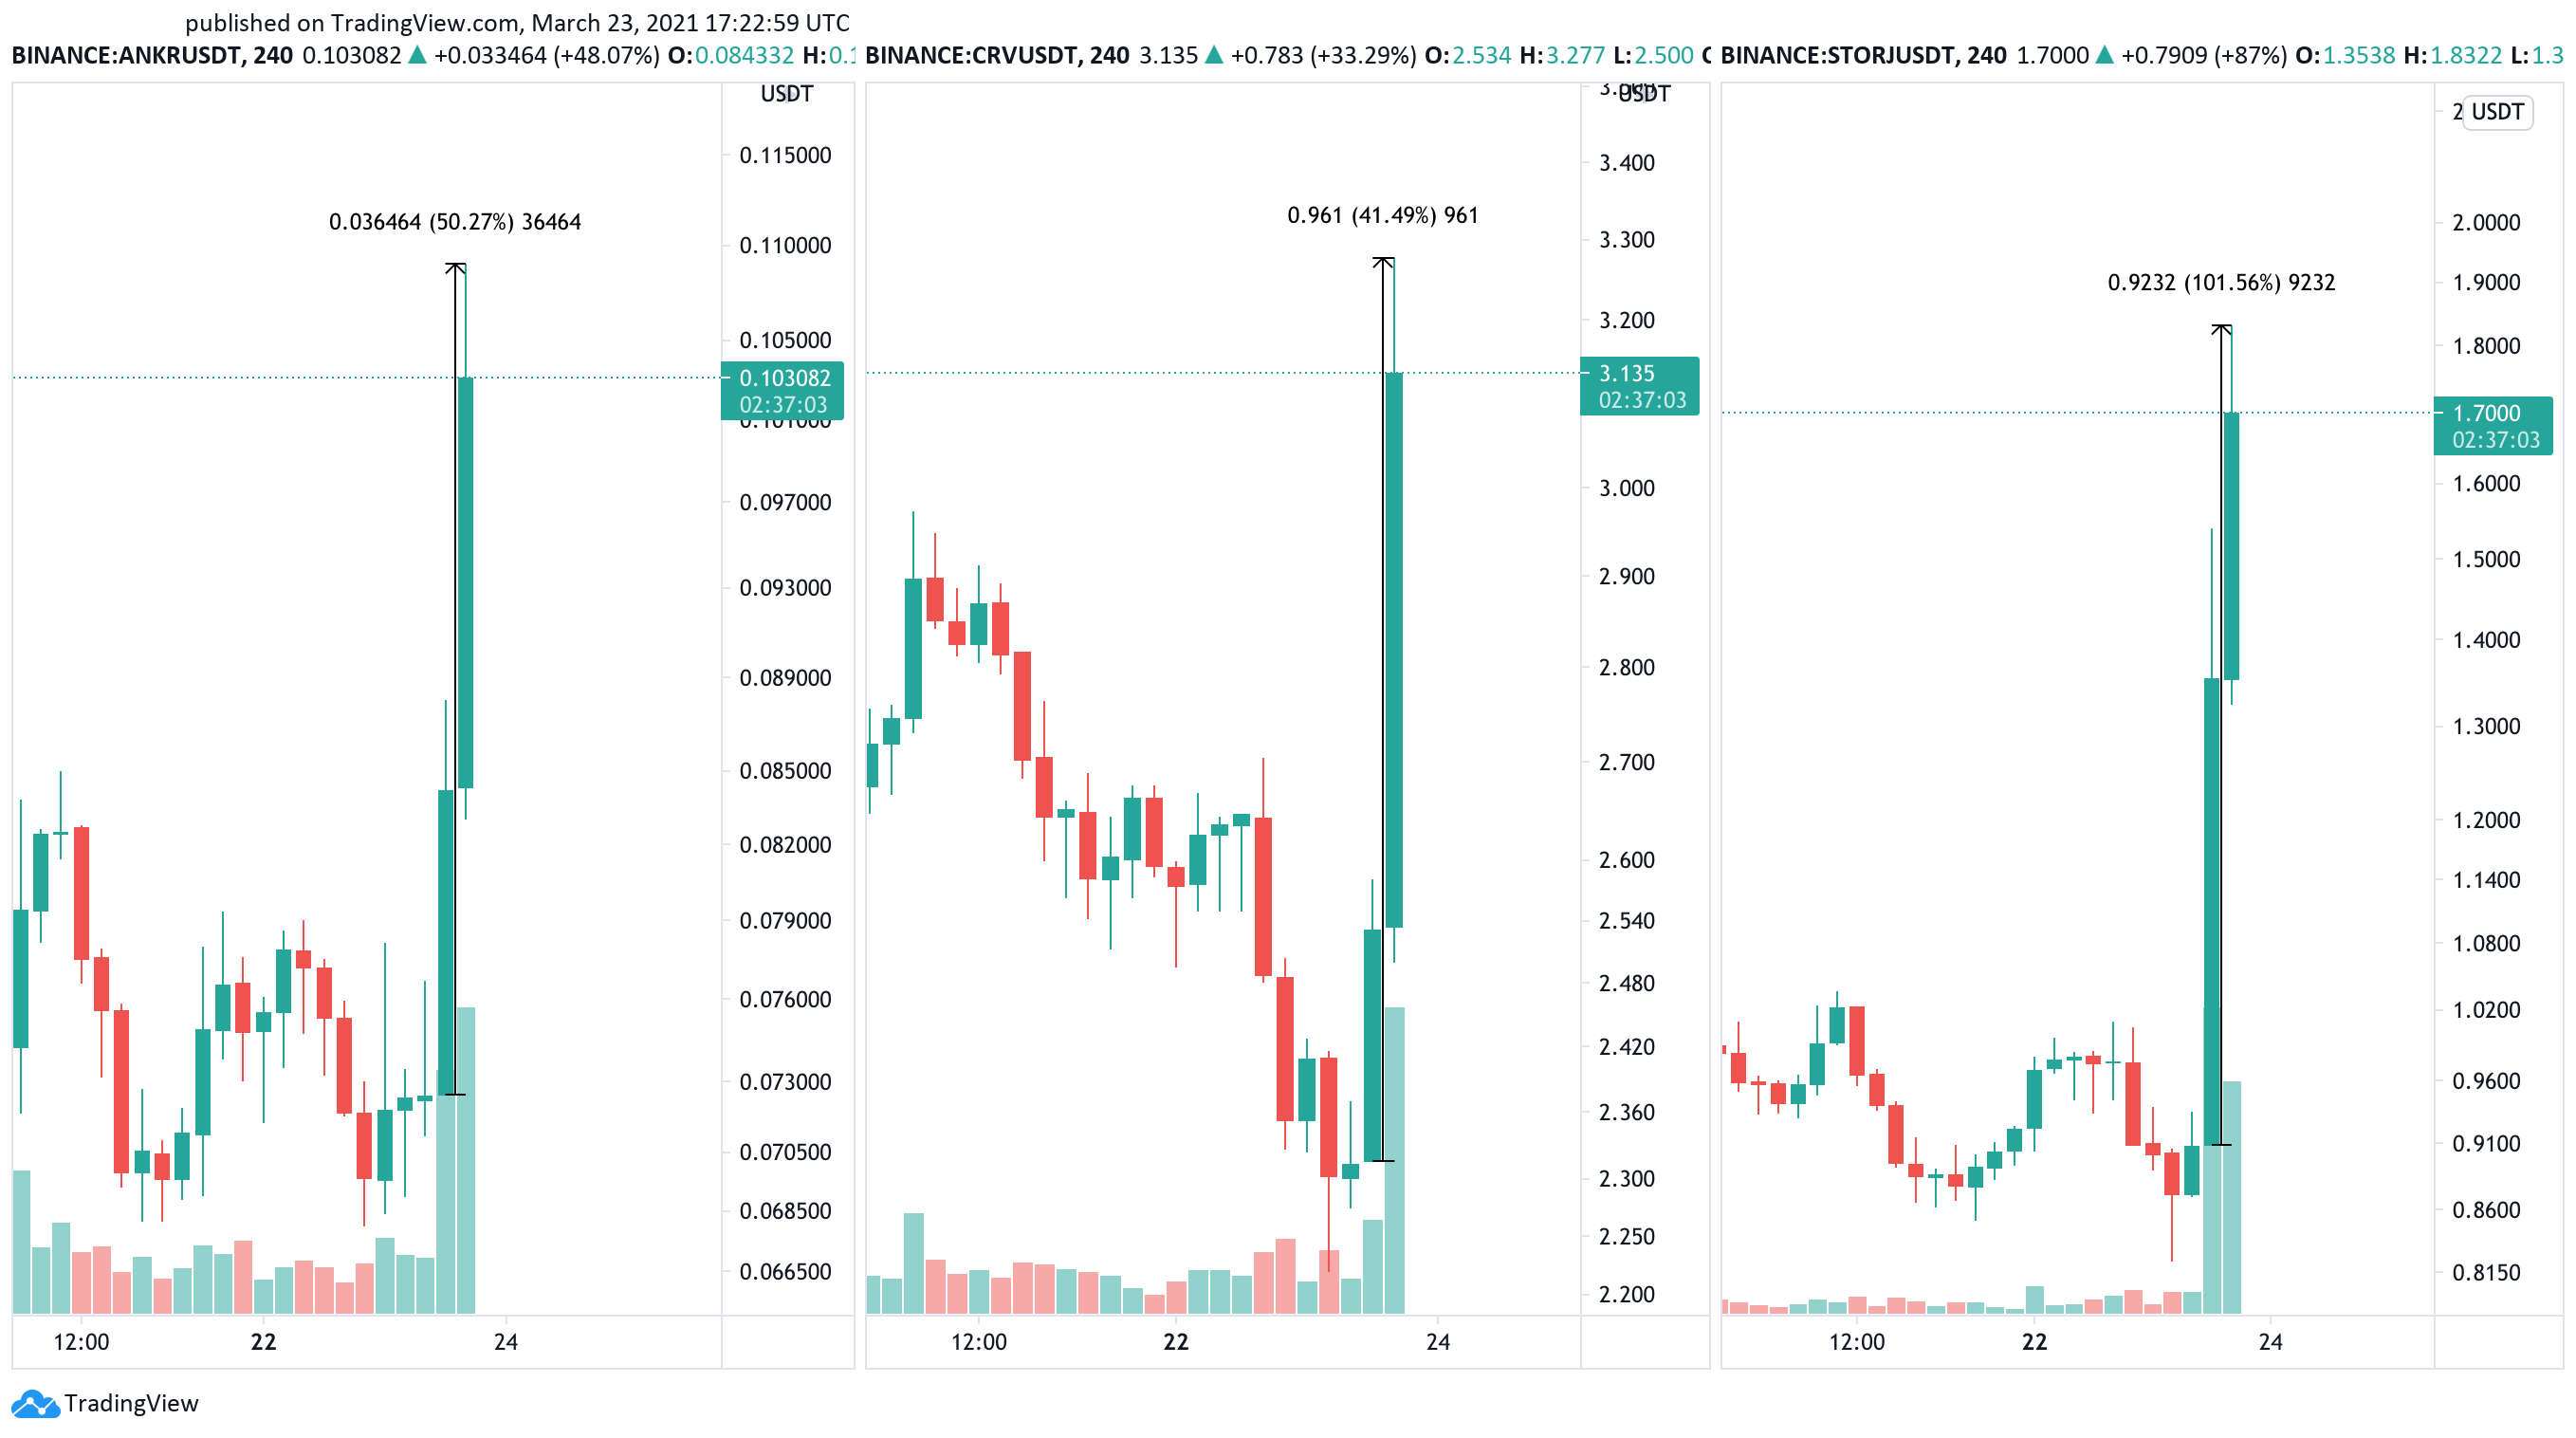 Ankr, Curve DAO Token, and Storj US price chart